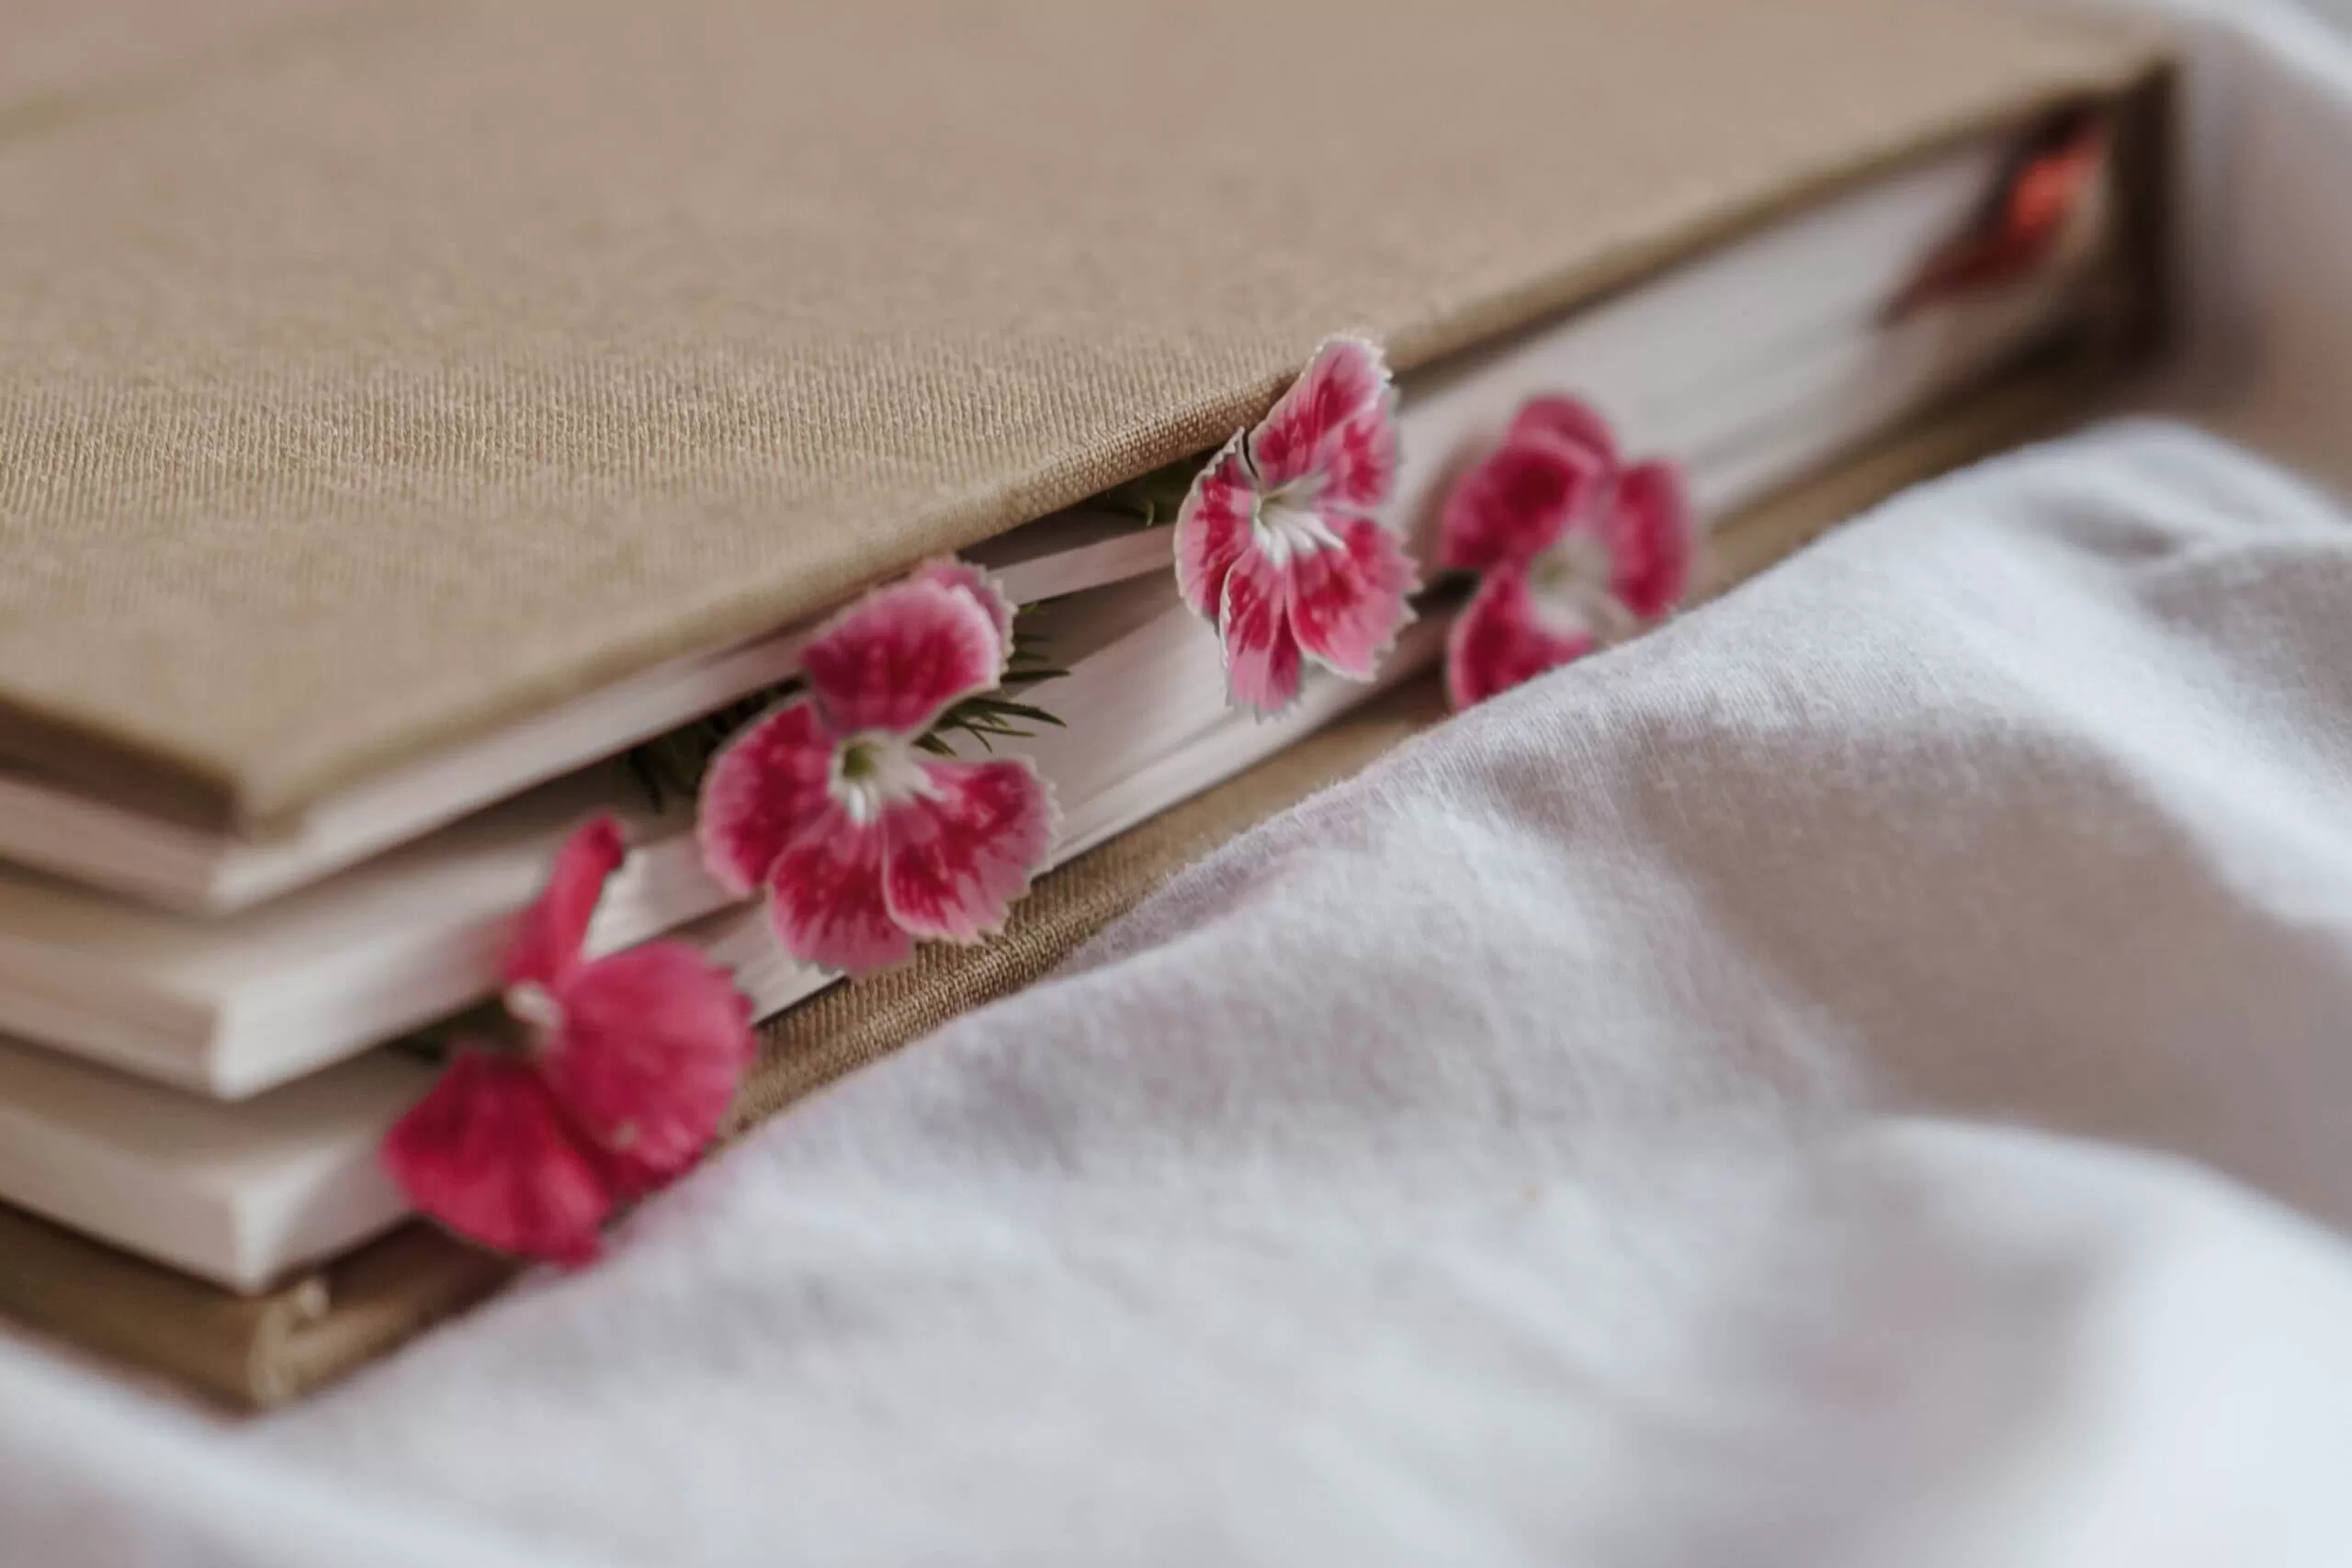 a plain notebook or journal with small pink flowers sticking out of it. the image reminds me of a diary of a girl